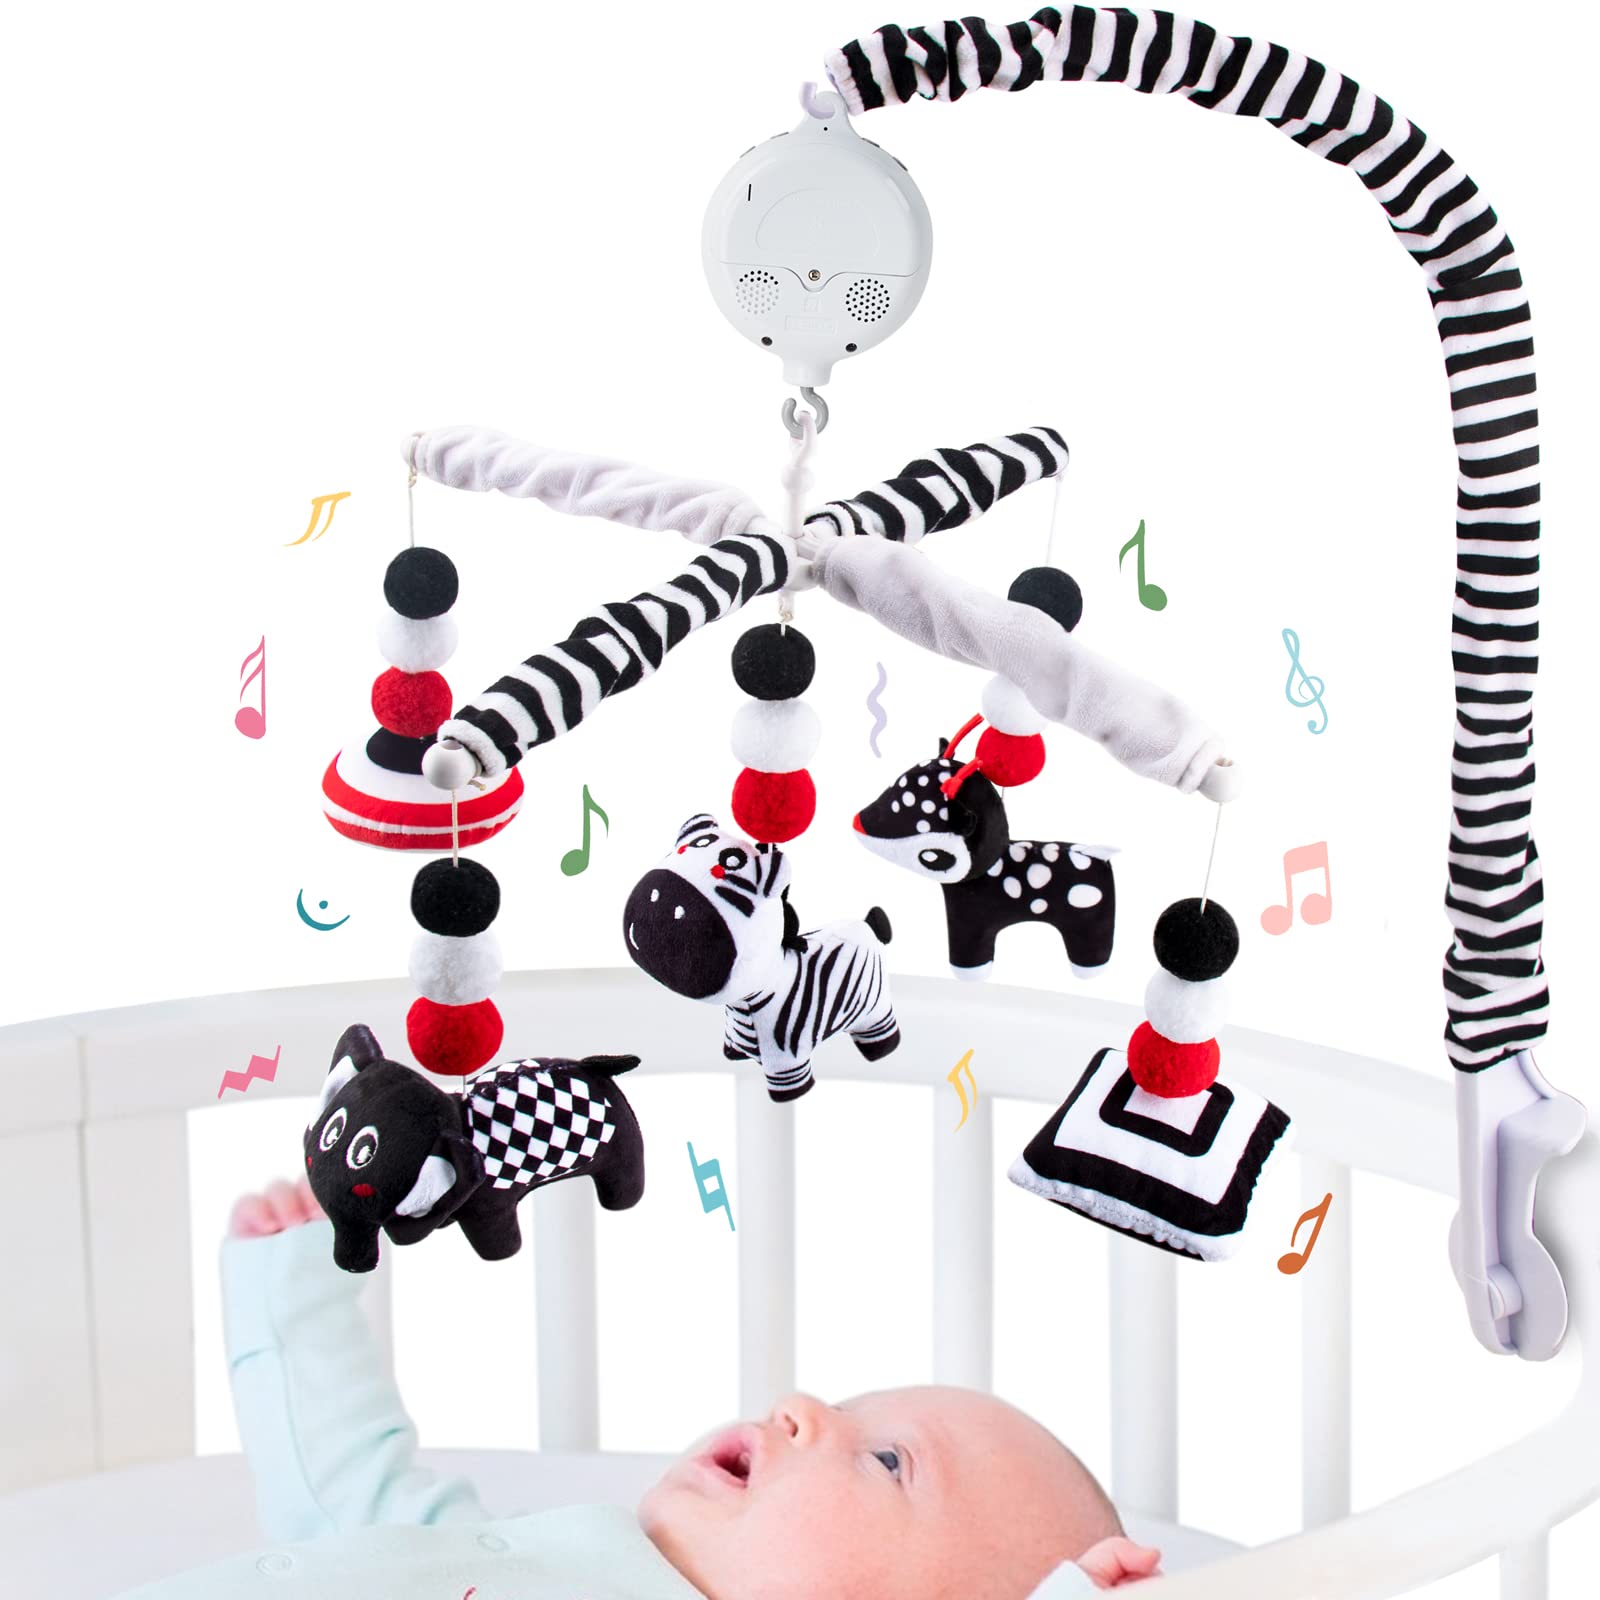 teytoy My First Baby Crib Mobile, Black and White Baby Mobile for Crib, High Contrast Mobile Toy for Newborn Infants Boys and Gi